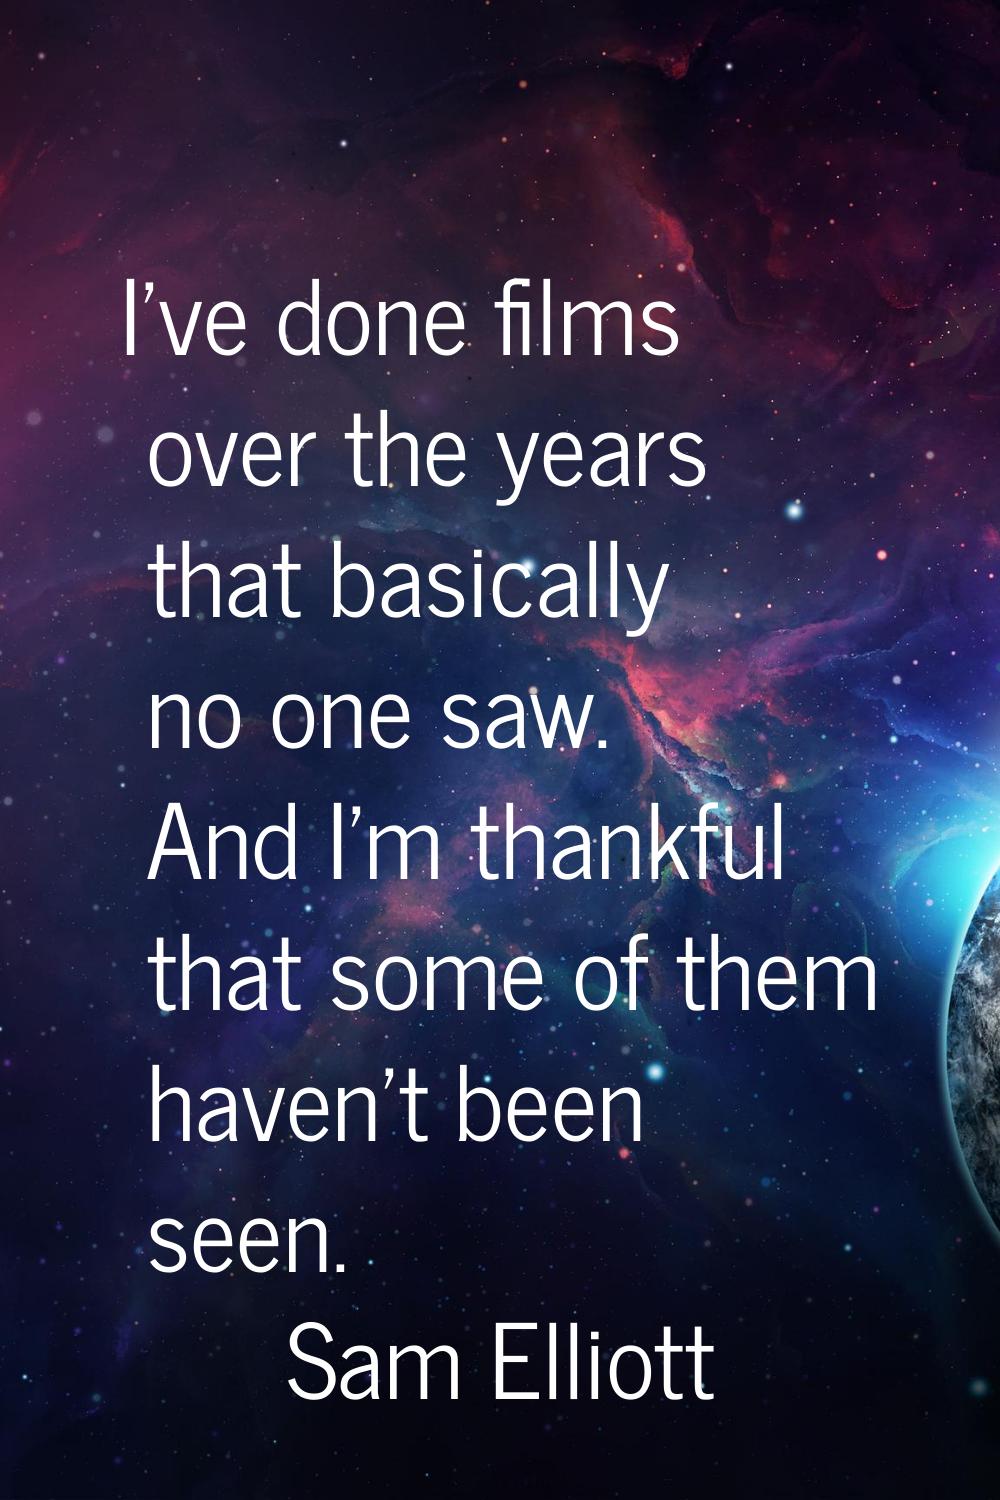 I've done films over the years that basically no one saw. And I'm thankful that some of them haven'